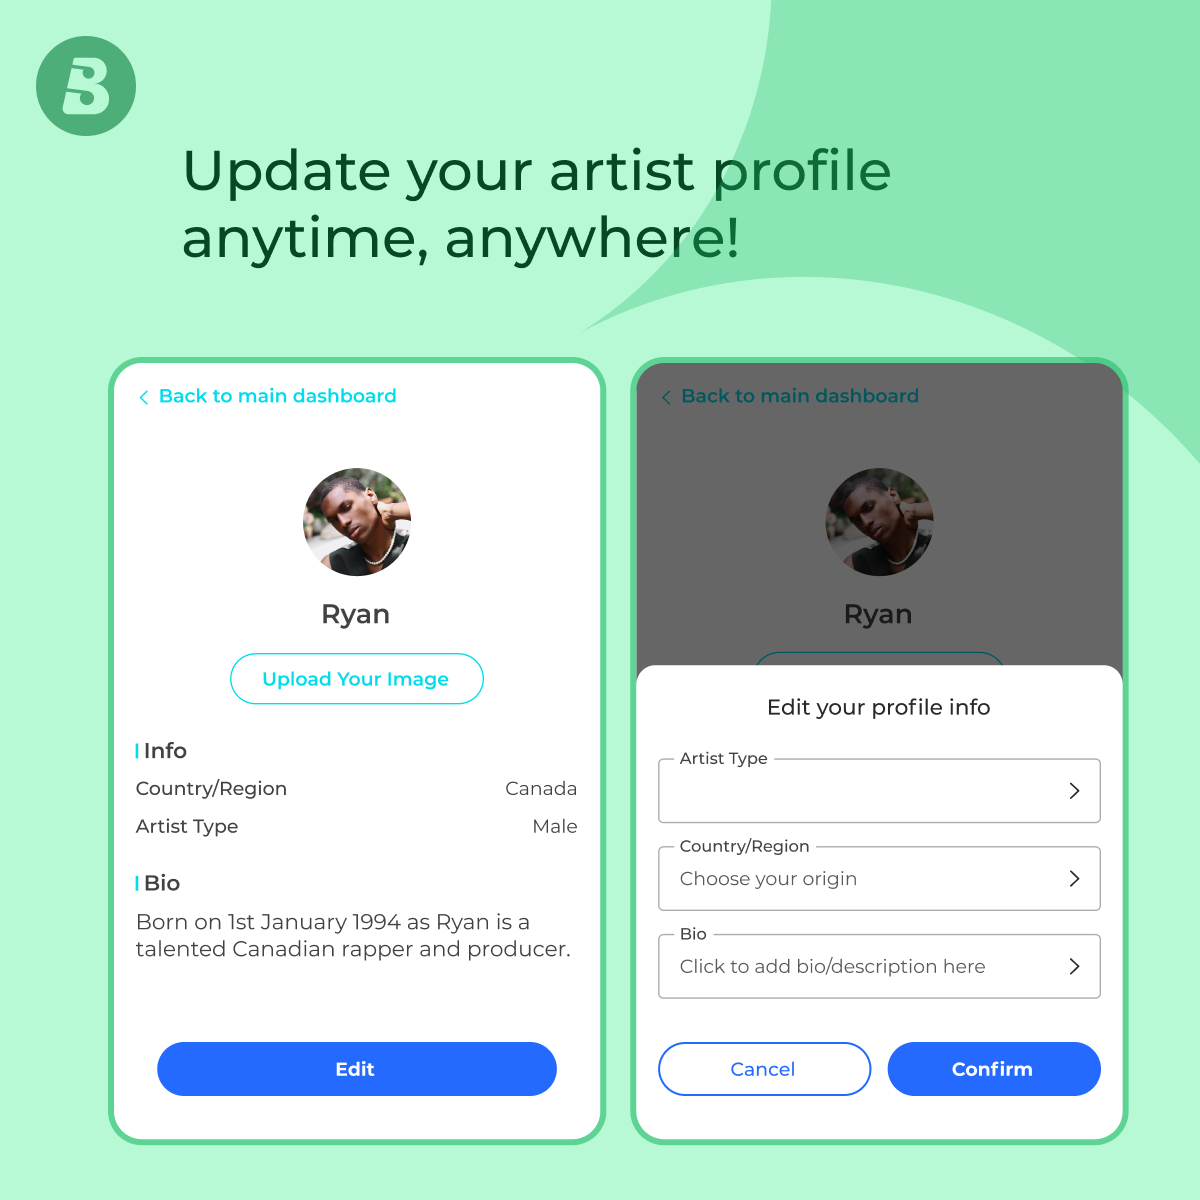 Brand new upgrade of Boomplay For Artists!